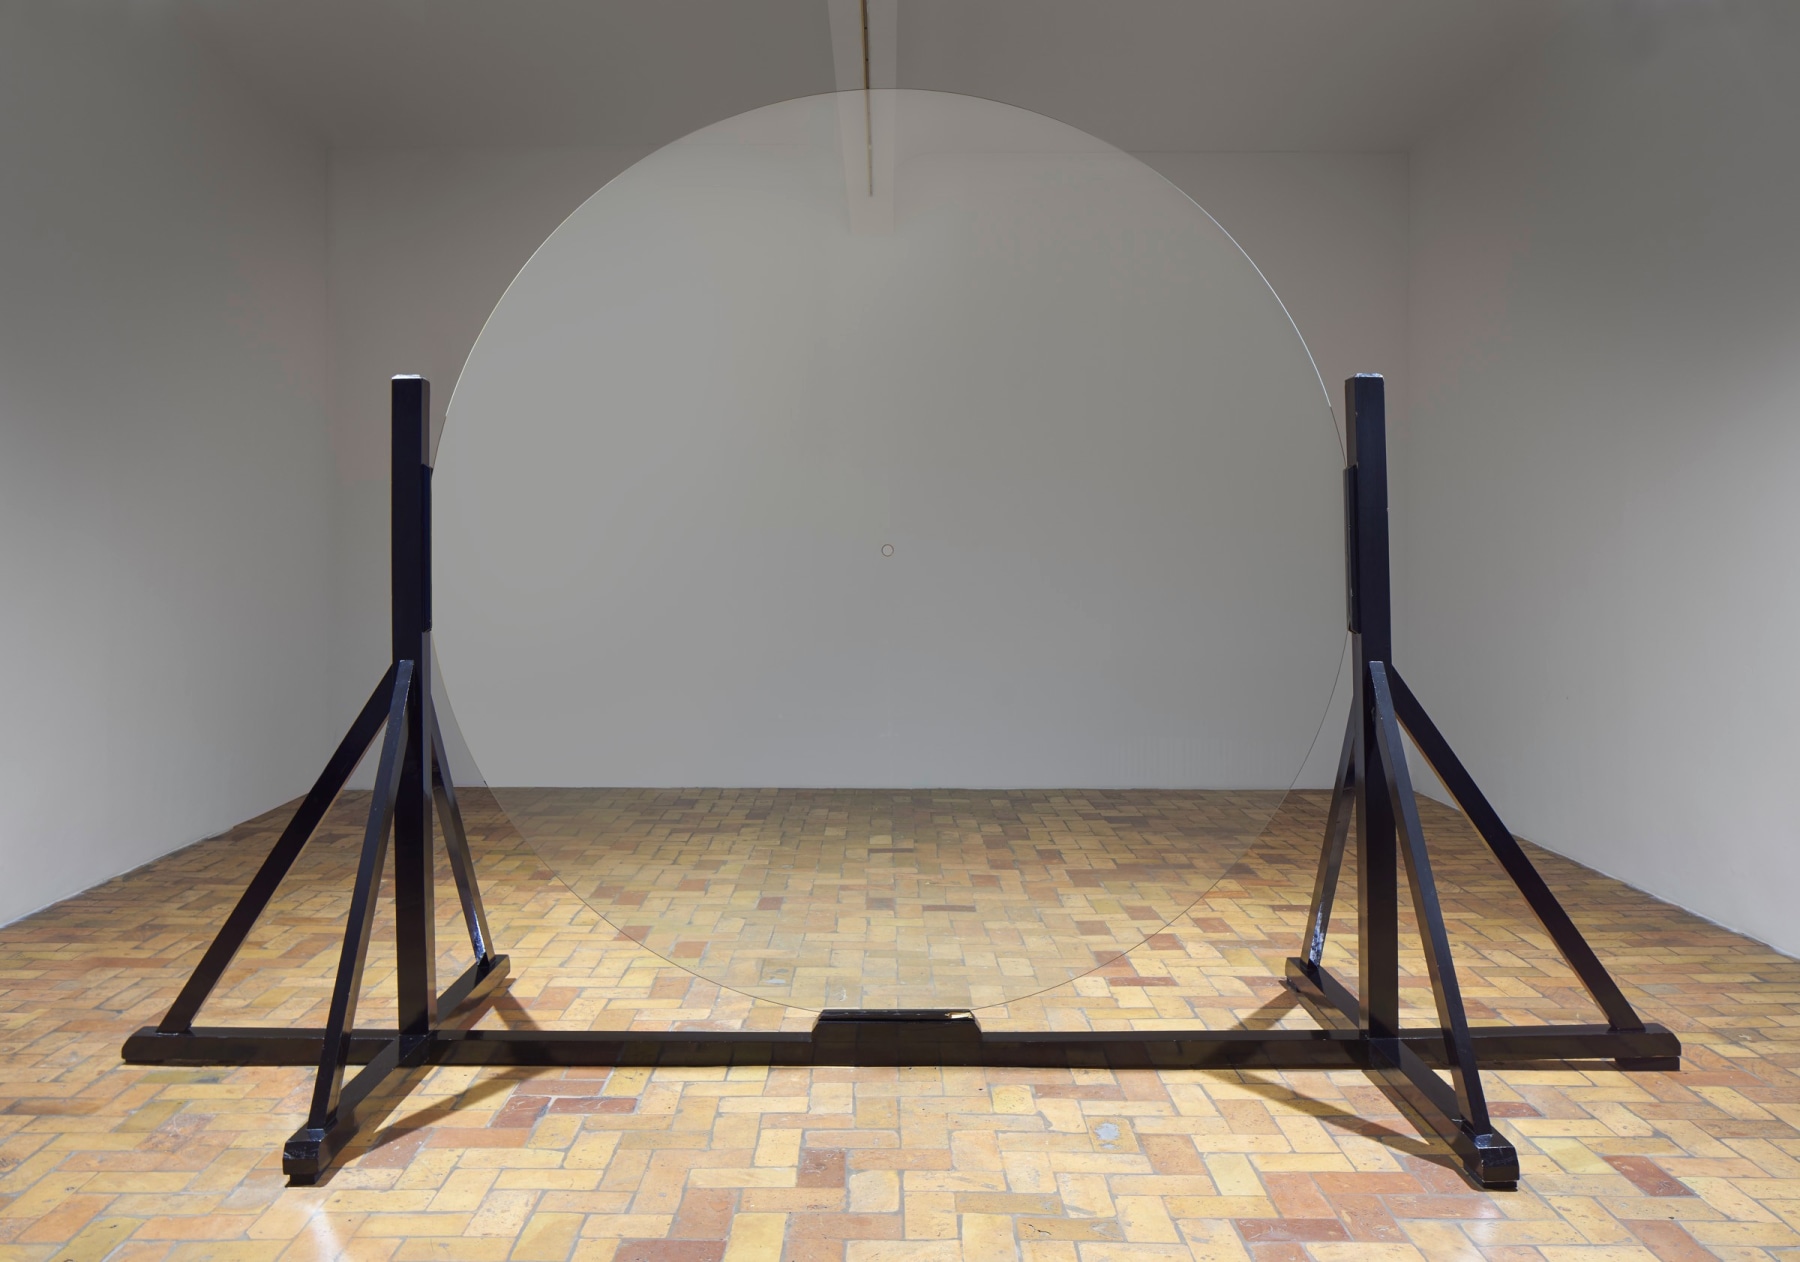 James Lee Byars

&amp;ldquo;The Hole for Speech&amp;rdquo;, 1981

Glass with gold leaf, wood

115 1/4 x 180 x 68 1/2 inches

292.5 x 457 x 174 cm

JB 36